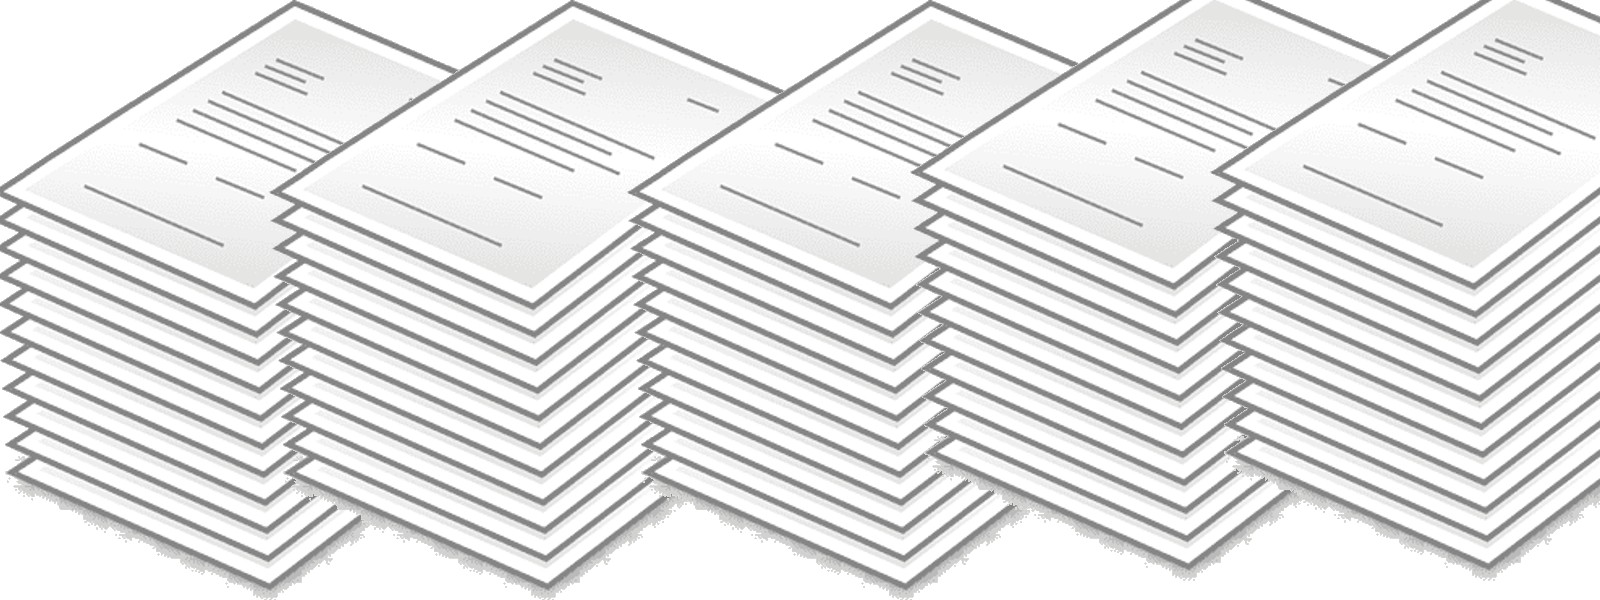 Program to reduce paper usage in Parliament